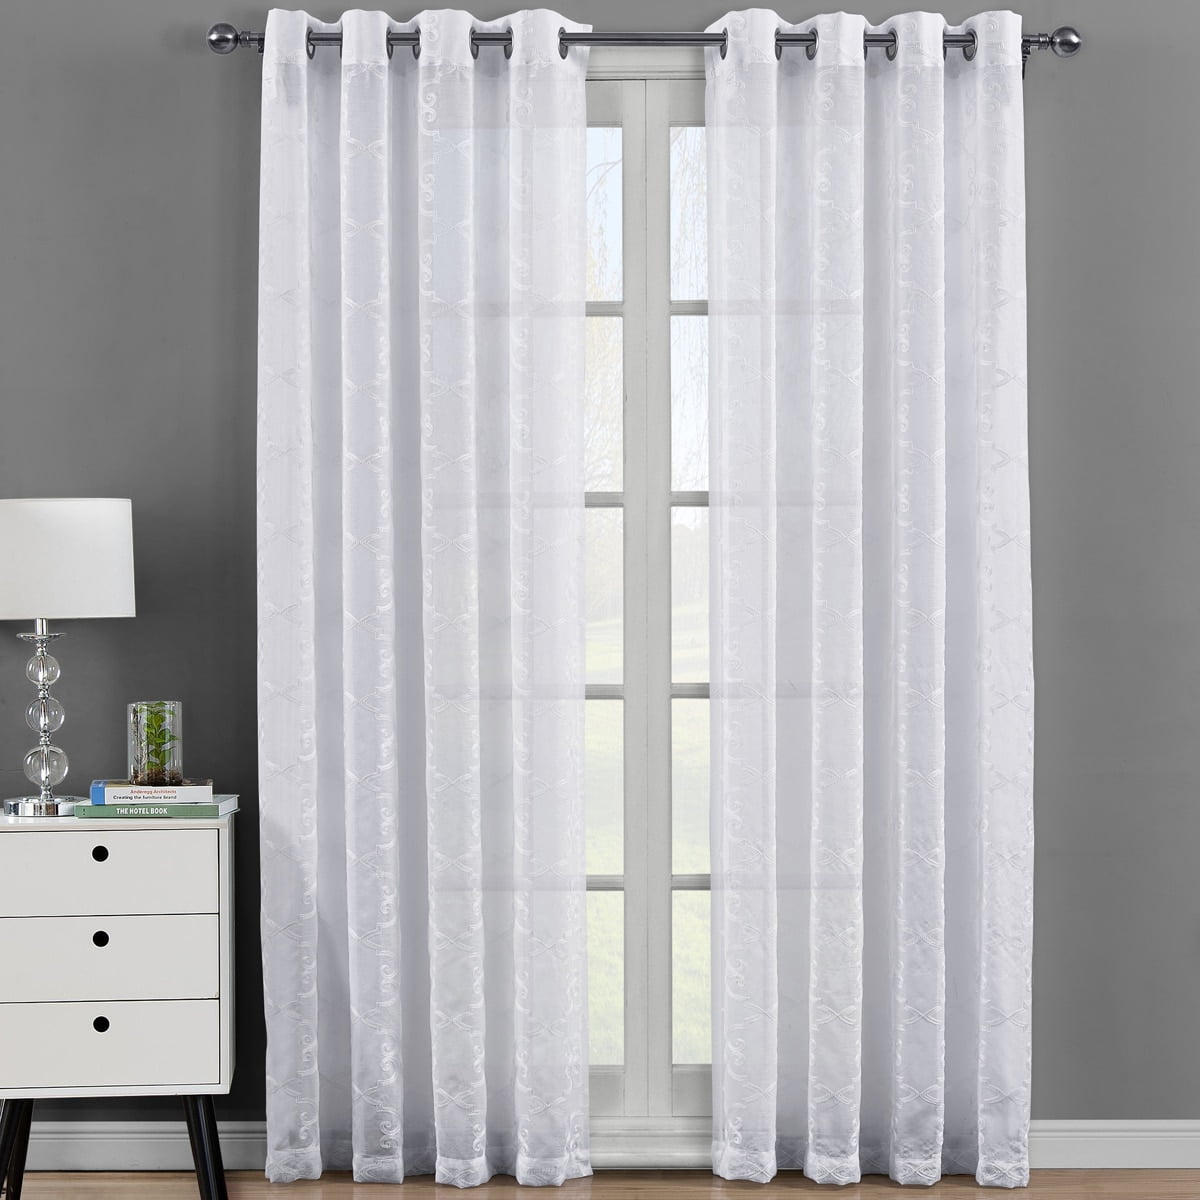 Luxury Embroidered FIONA Slot Top Header Voile Curtain Panels White Or Cream 